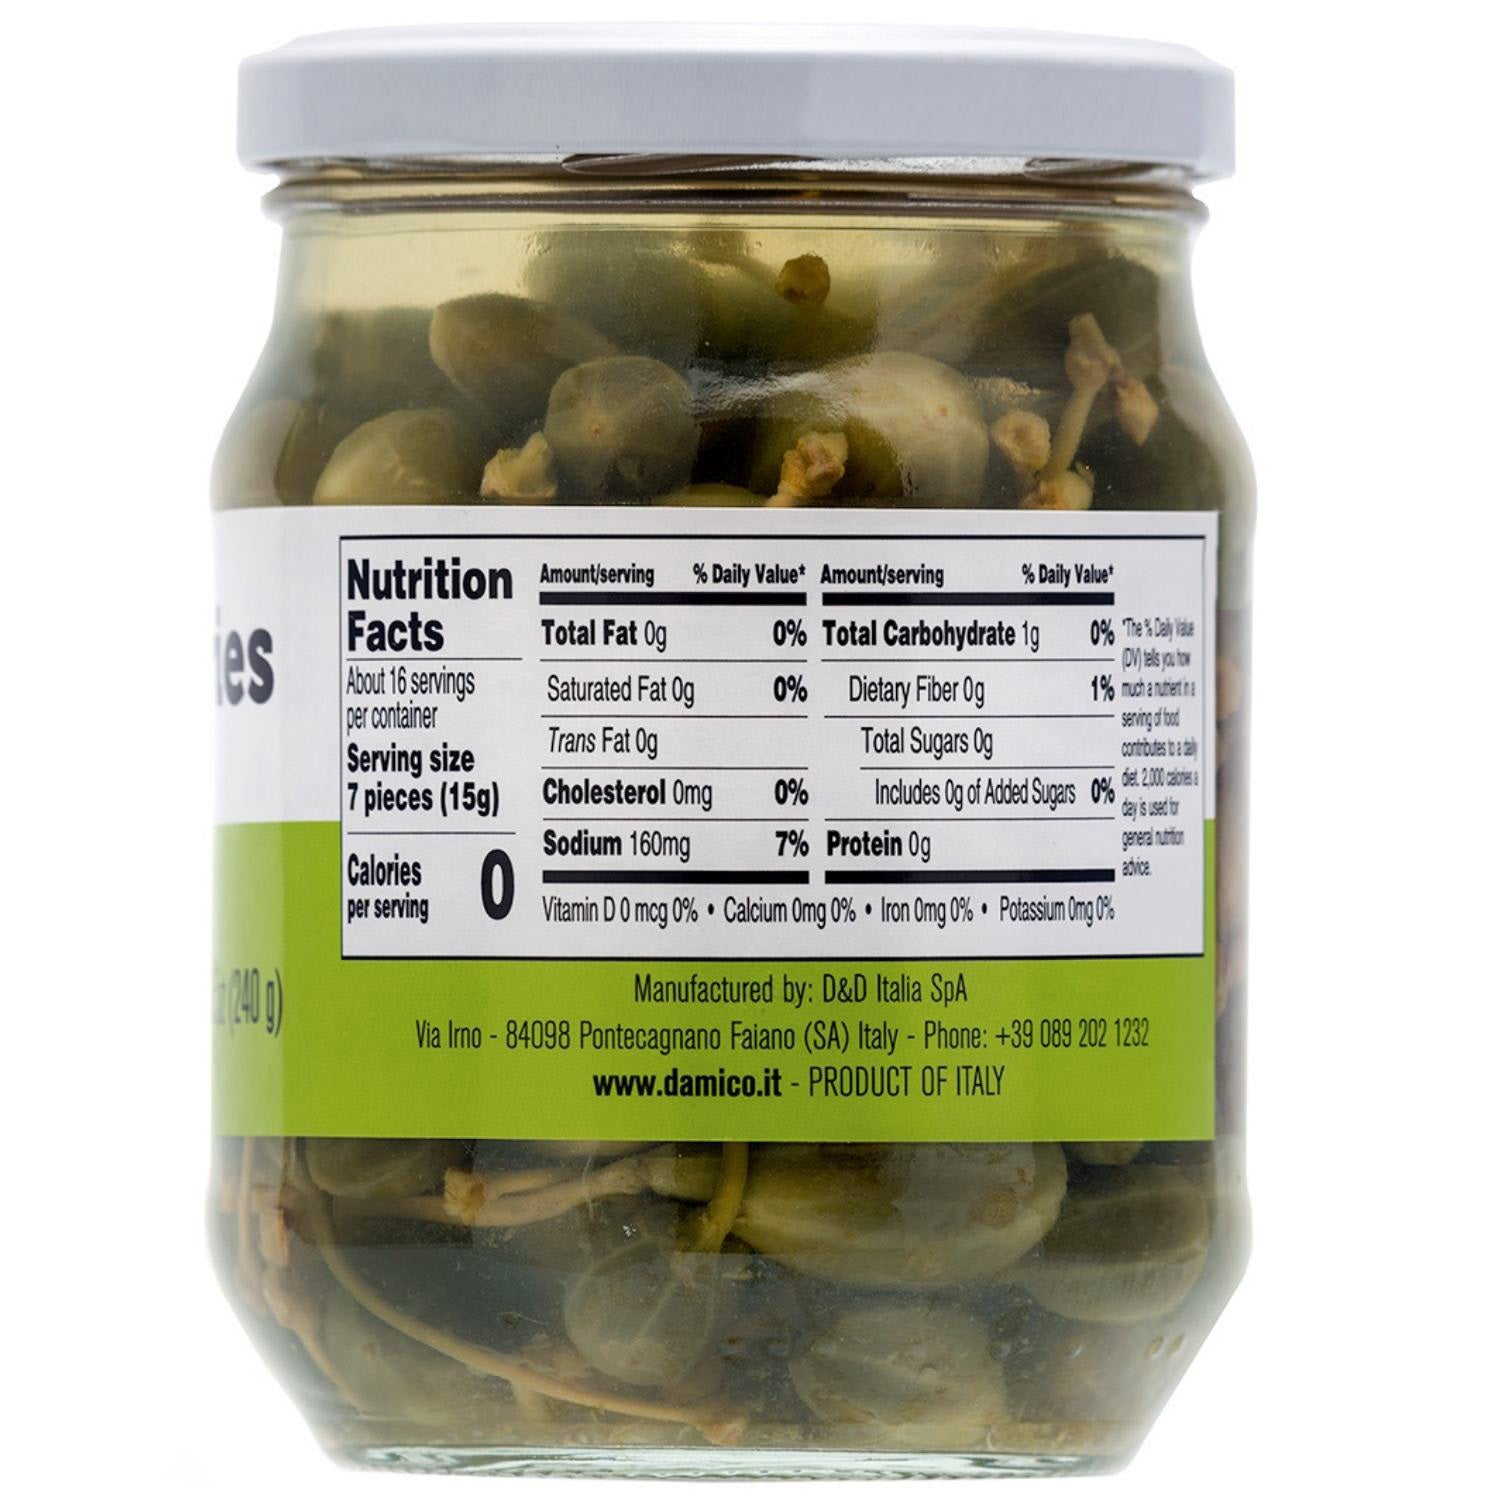 Fratelli D'Amico Caperberries in vinegar, Pickled, Capers. Net Wt 19oz (540g)